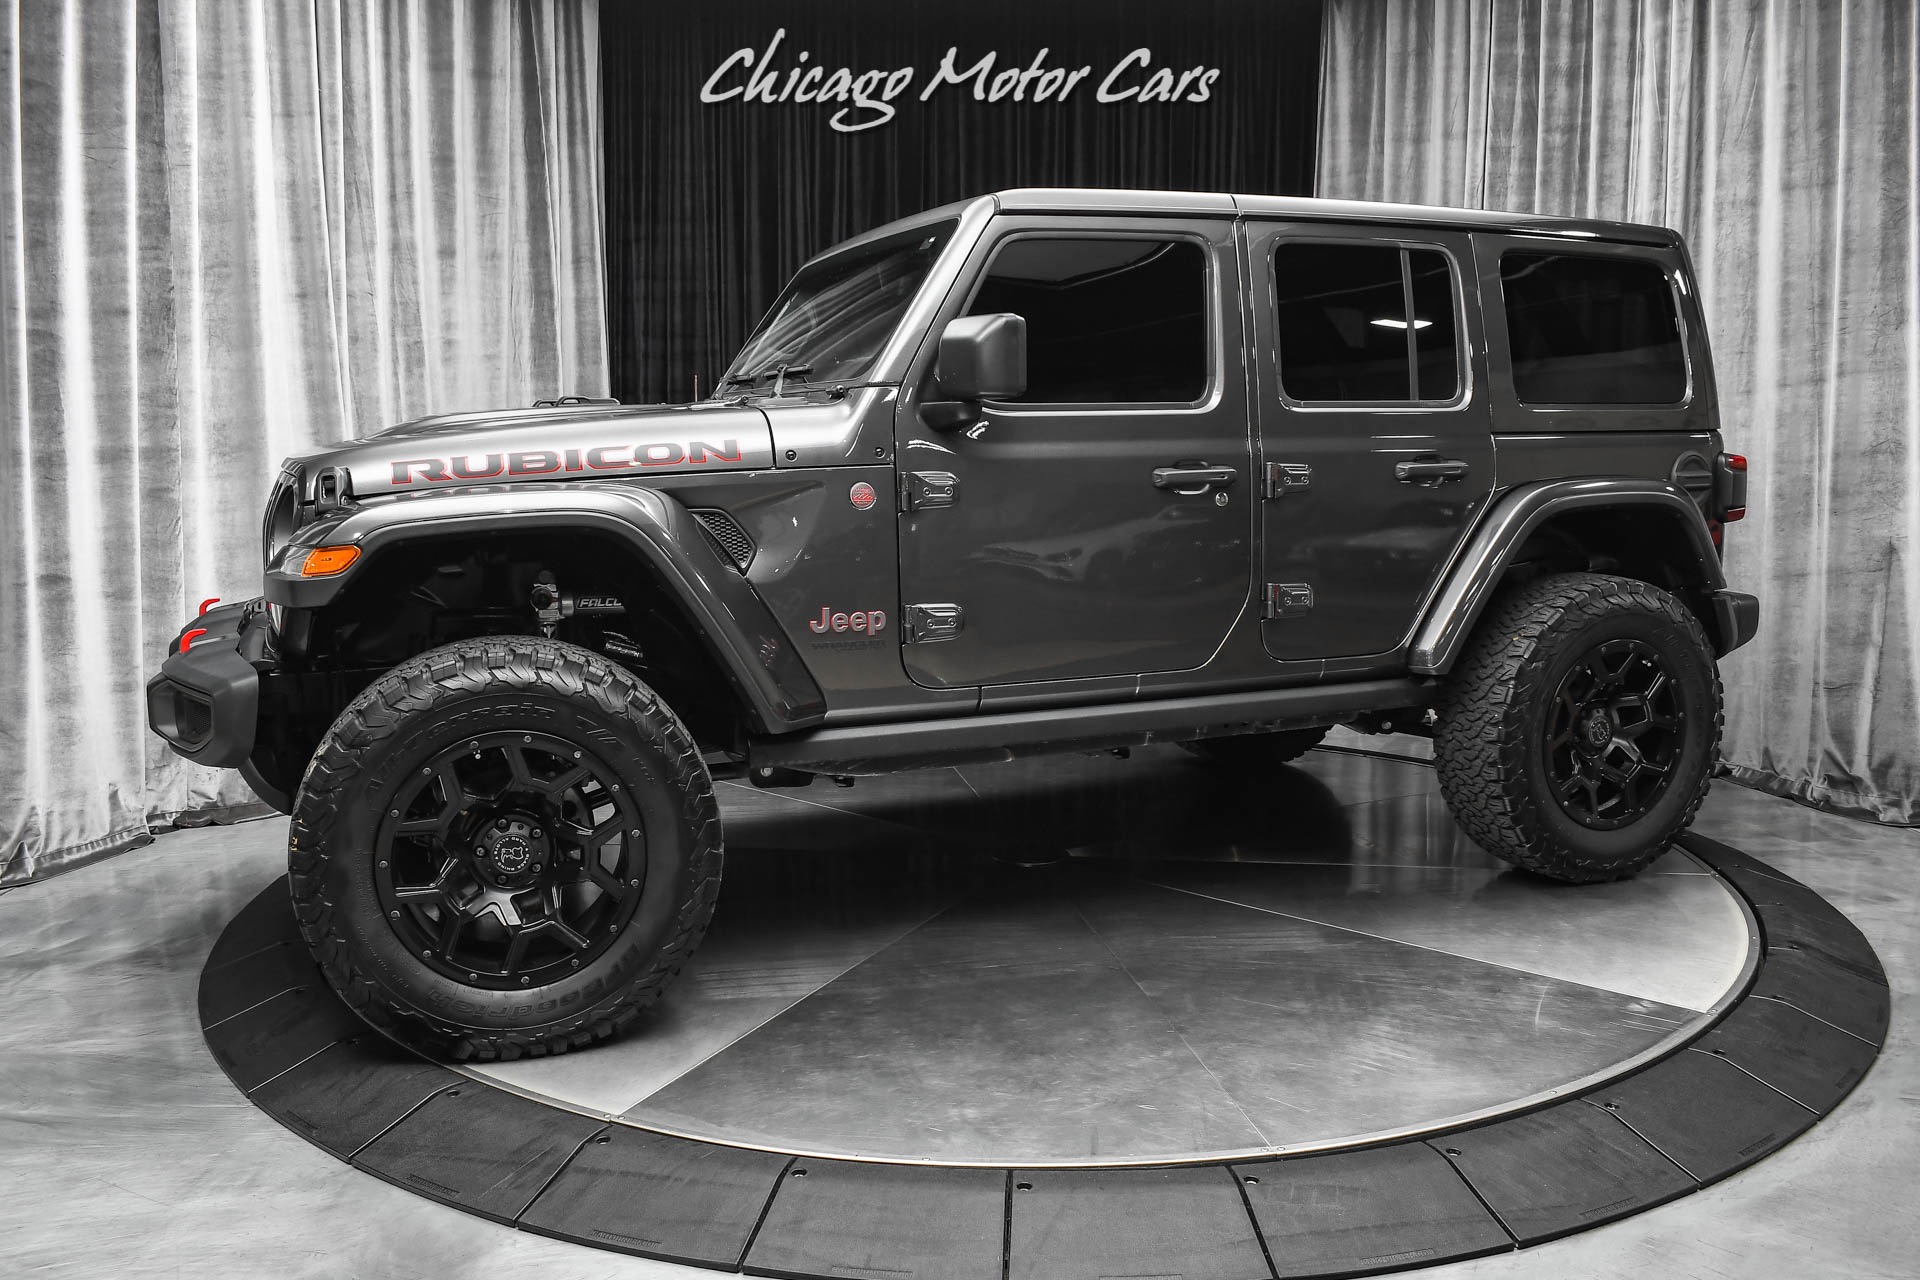 Used 2018 Jeep Wrangler Unlimited Rubicon LOADED with Factory Options! Rock  Crawler Lift! 35 Inch Wheels! For Sale (Special Pricing) | Chicago Motor  Cars Stock #18611